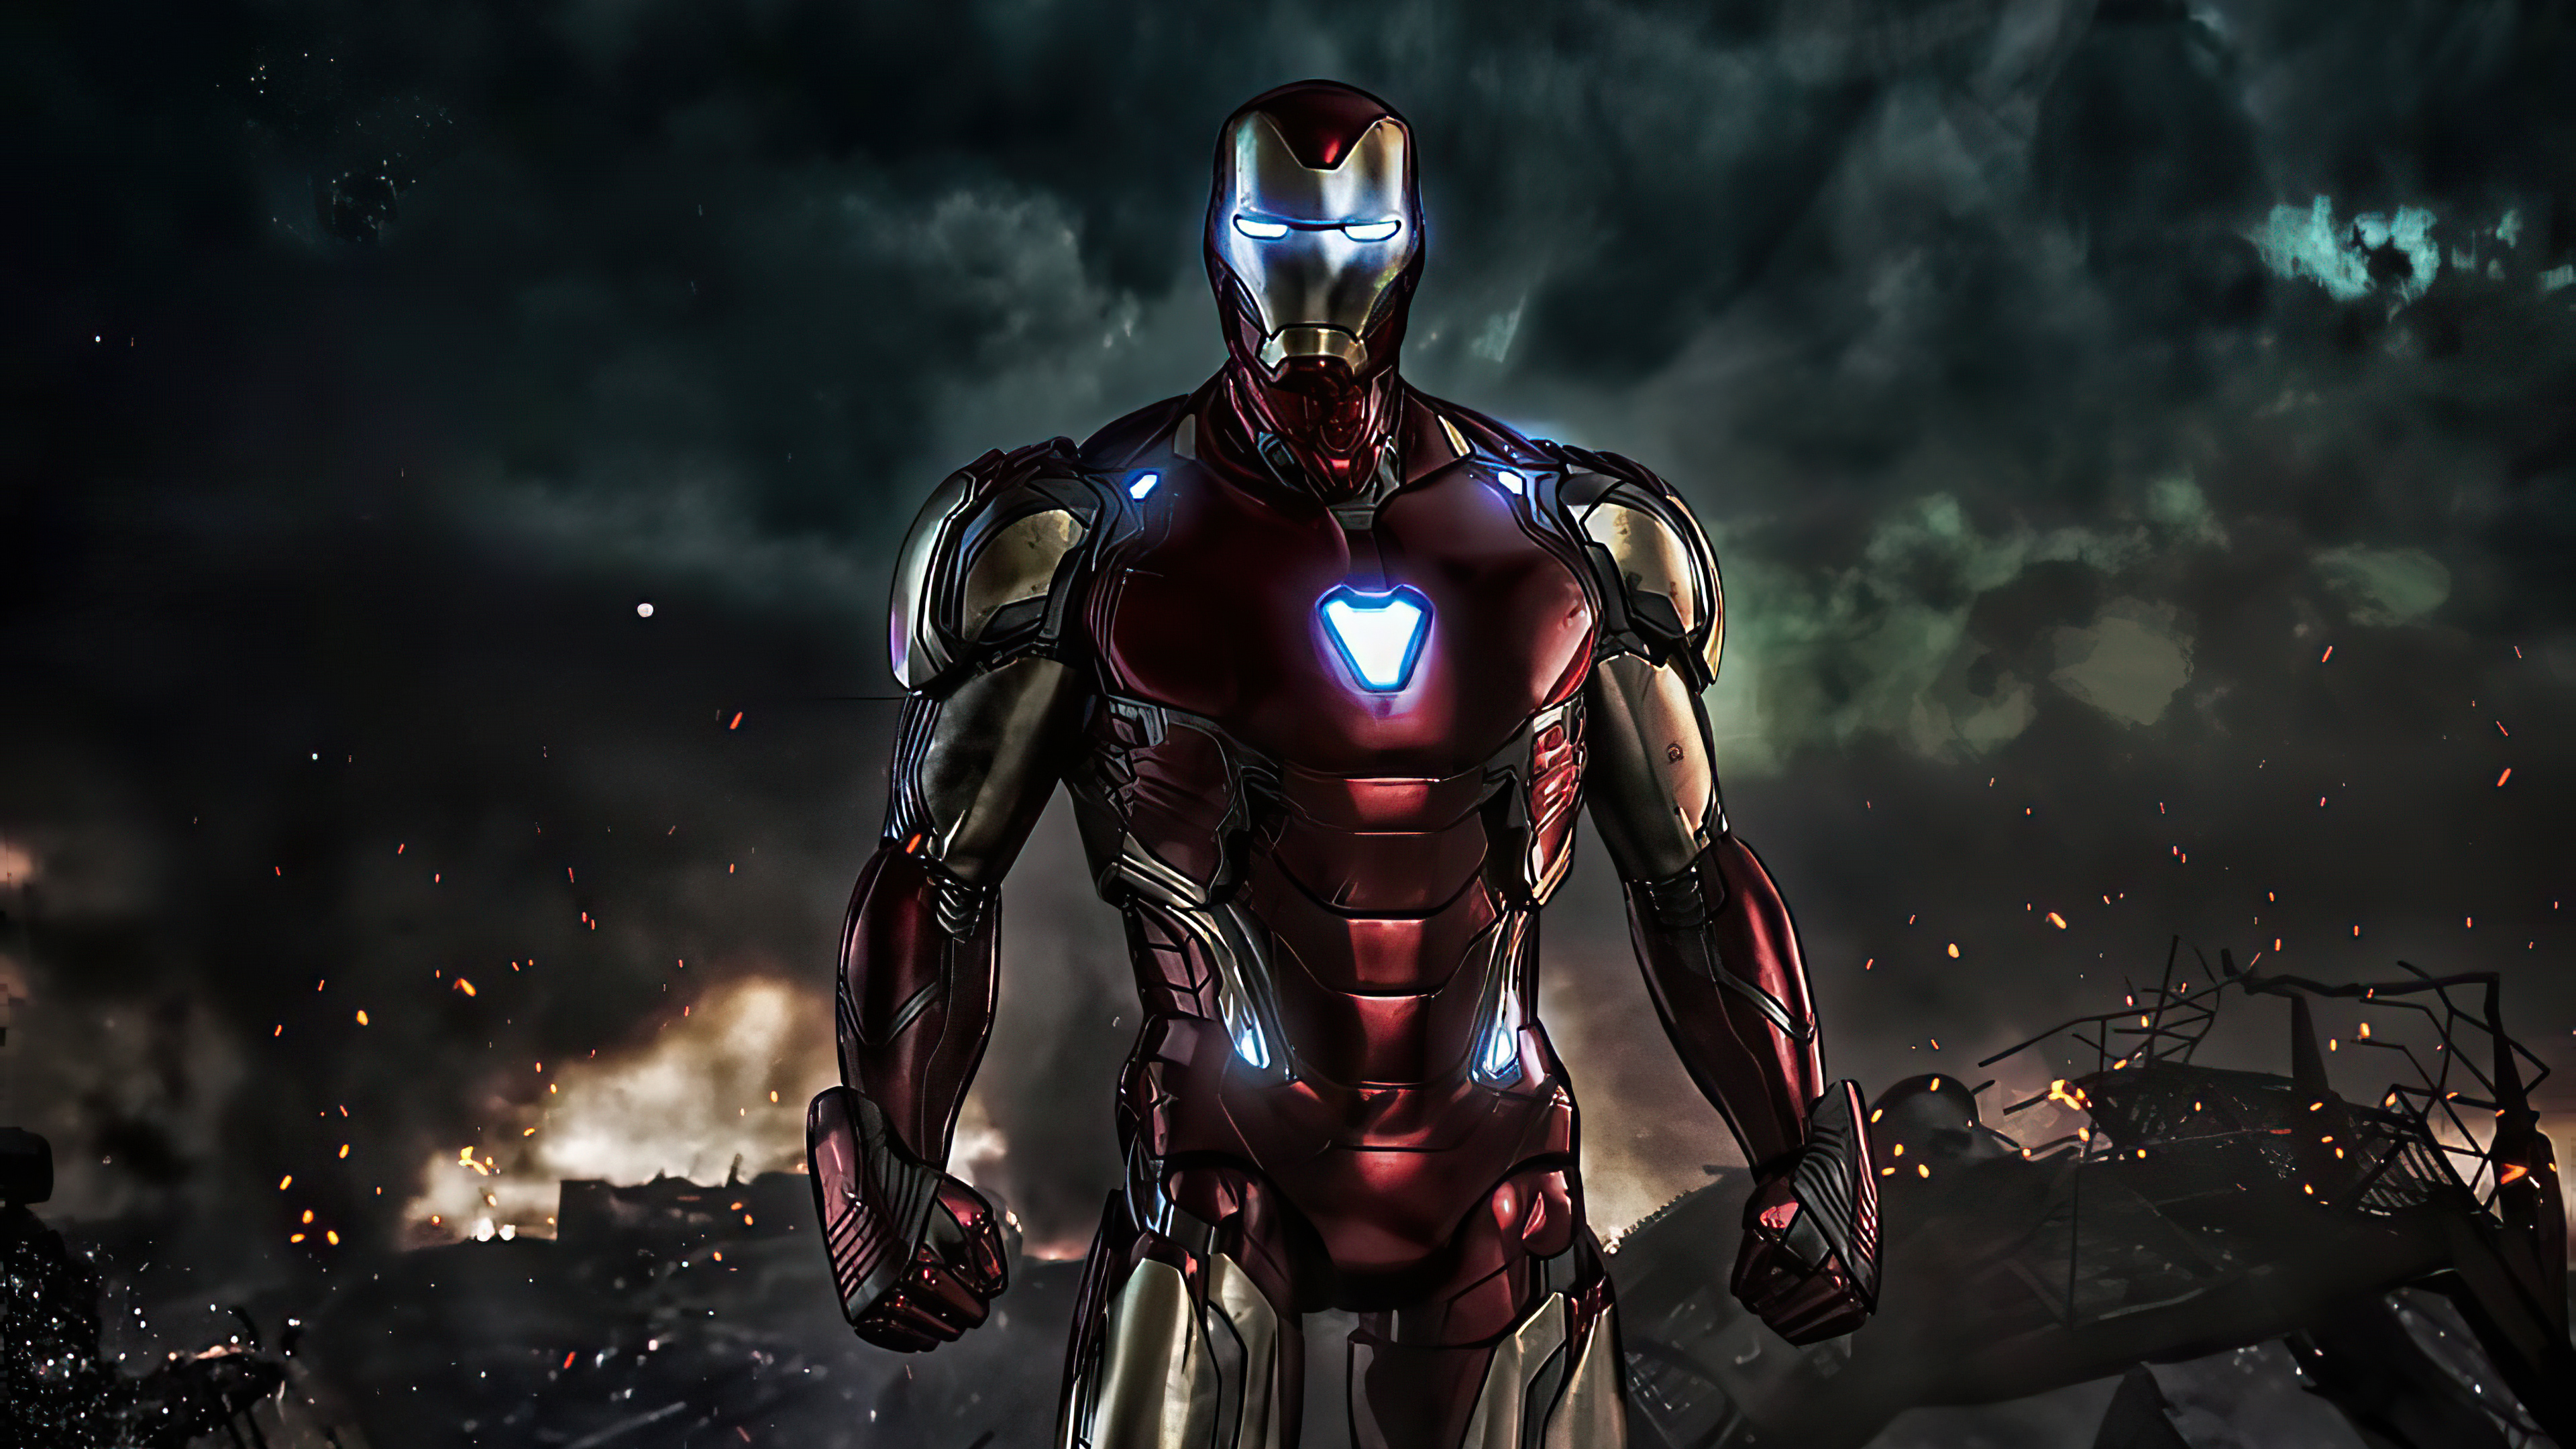 4k Iron Man Endgame 2020, HD Superheroes, 4k Wallpapers, Images, Backgrounds,  Photos and Pictures